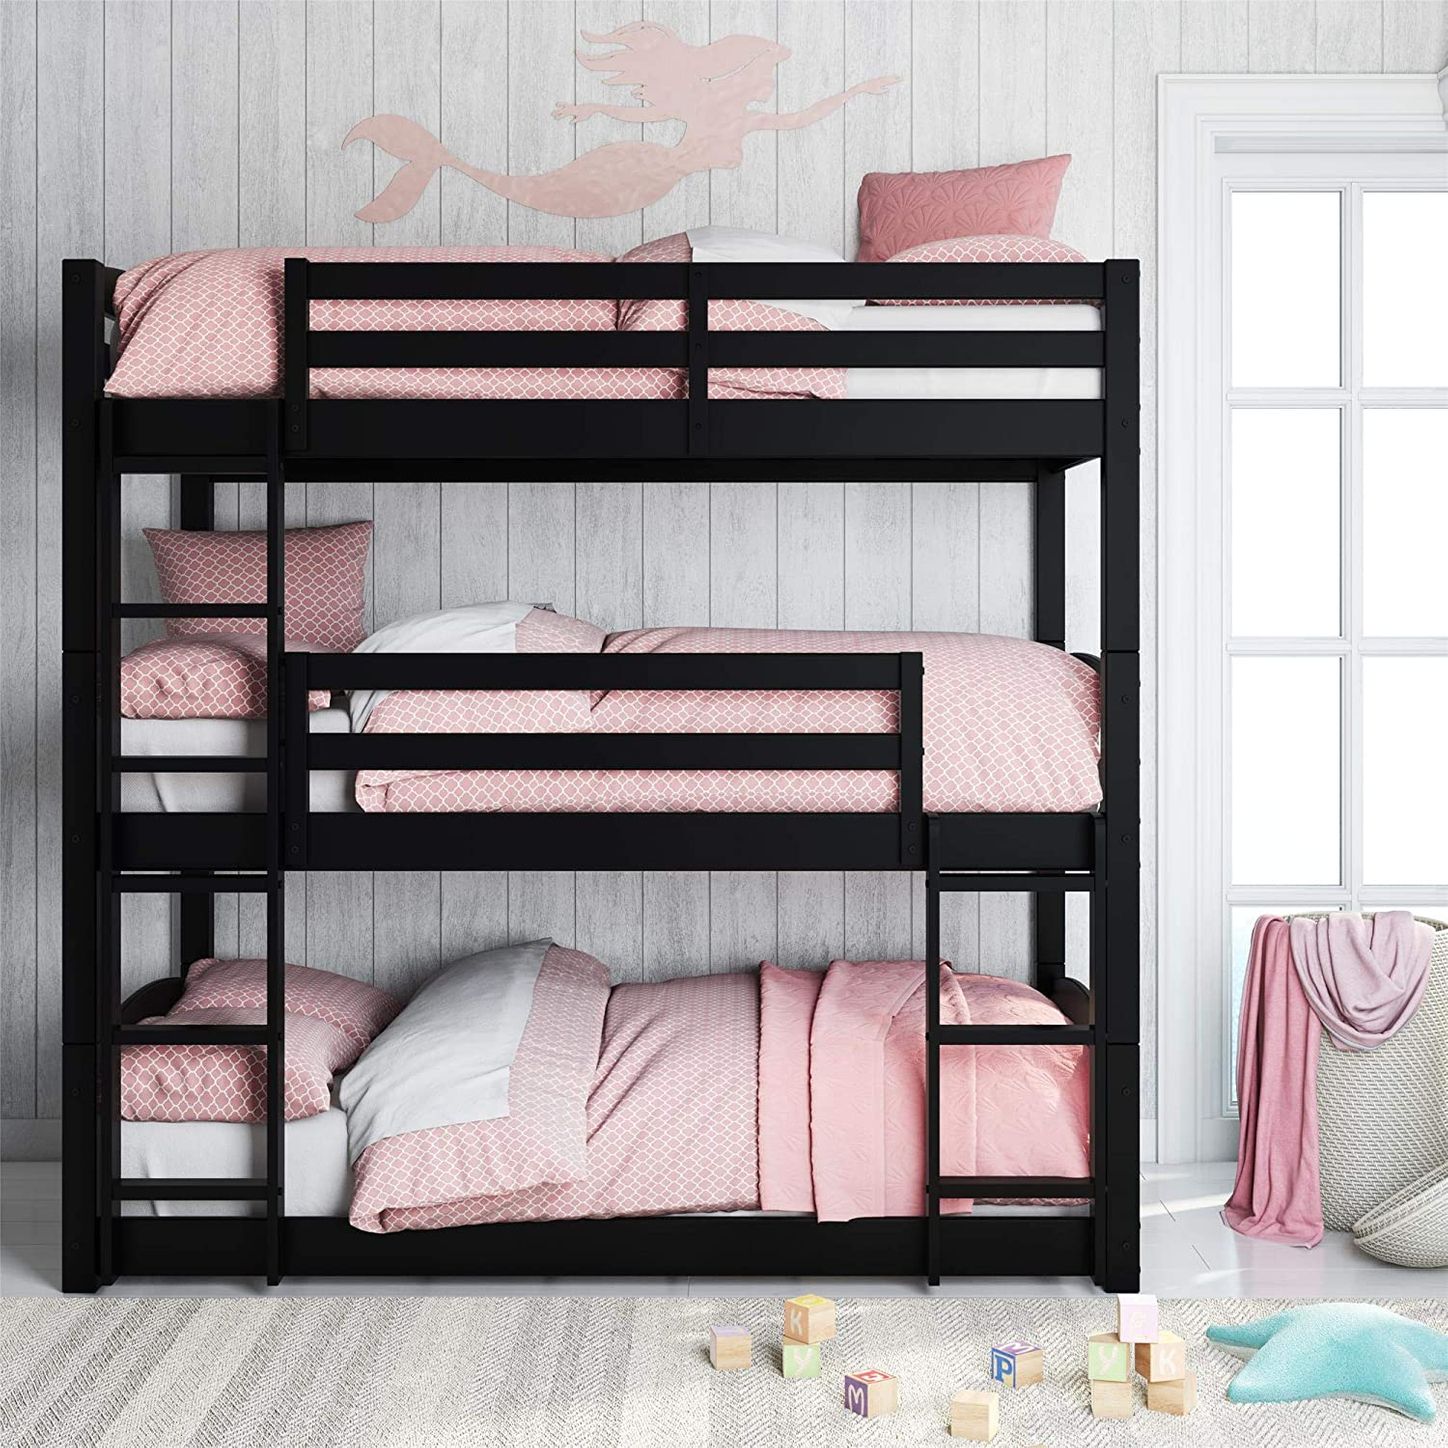 8 Best Bunk Beds 2020 The Strategist, Top Bunk Bed Only